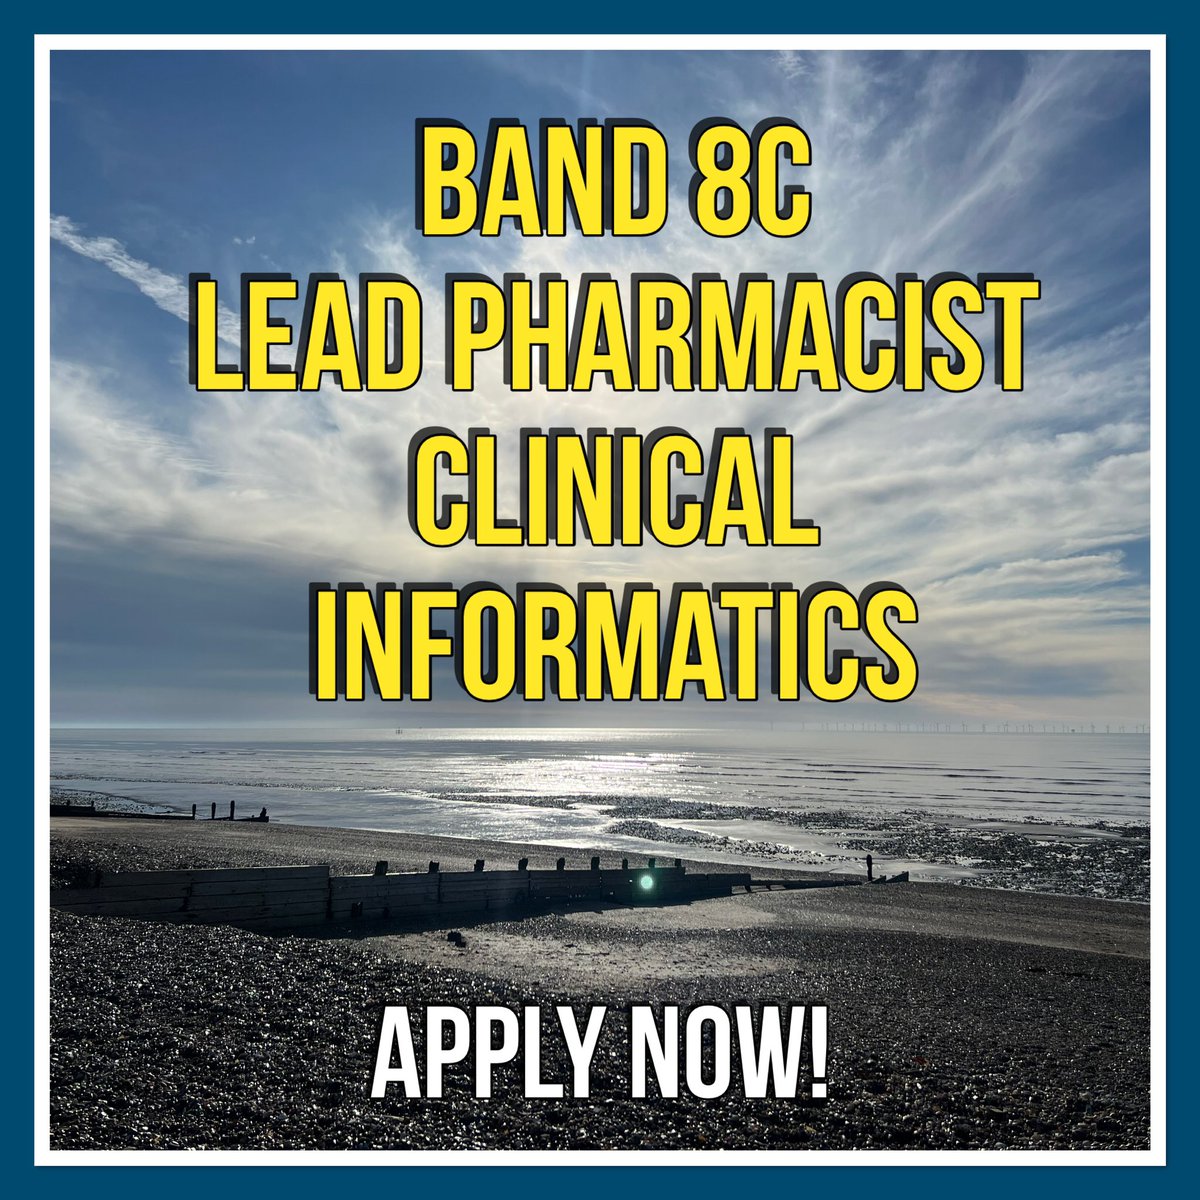 EXCITING & RARE opportunity to lead #Pharmacy #ClinicalInformatics team @UHSussex Recruiting 8C #Pharmacist Senior Leadership position to optimise current #EPMA system & lead the way for #Interoperability across the Trust & further. Apply now!  Link below👇🏻